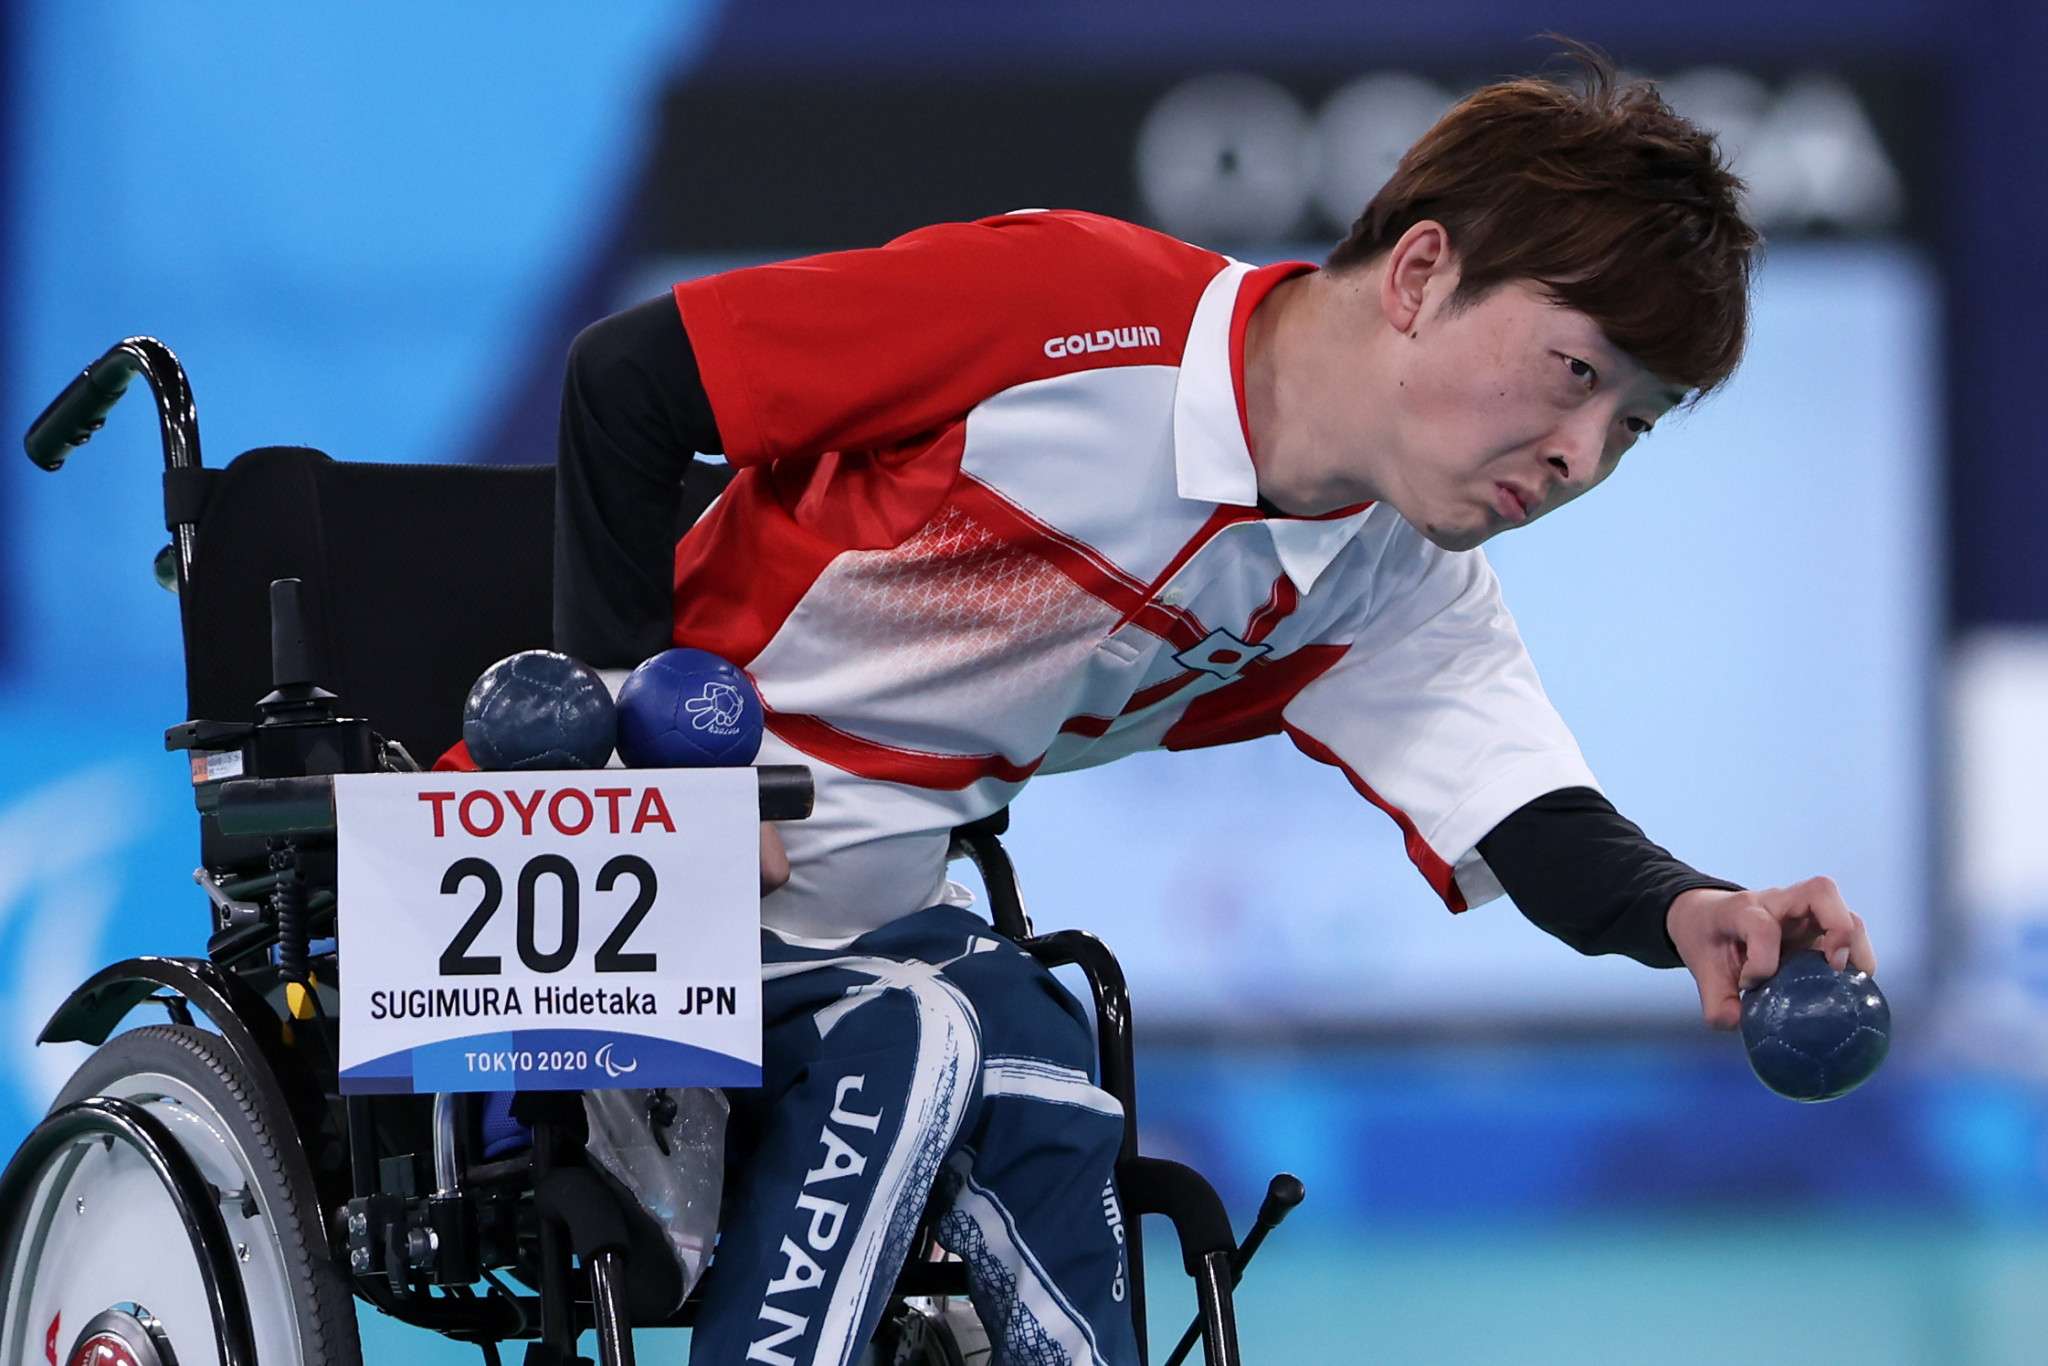 Boccia is one of the sports that saw a funding rise in Japan ©Getty Images